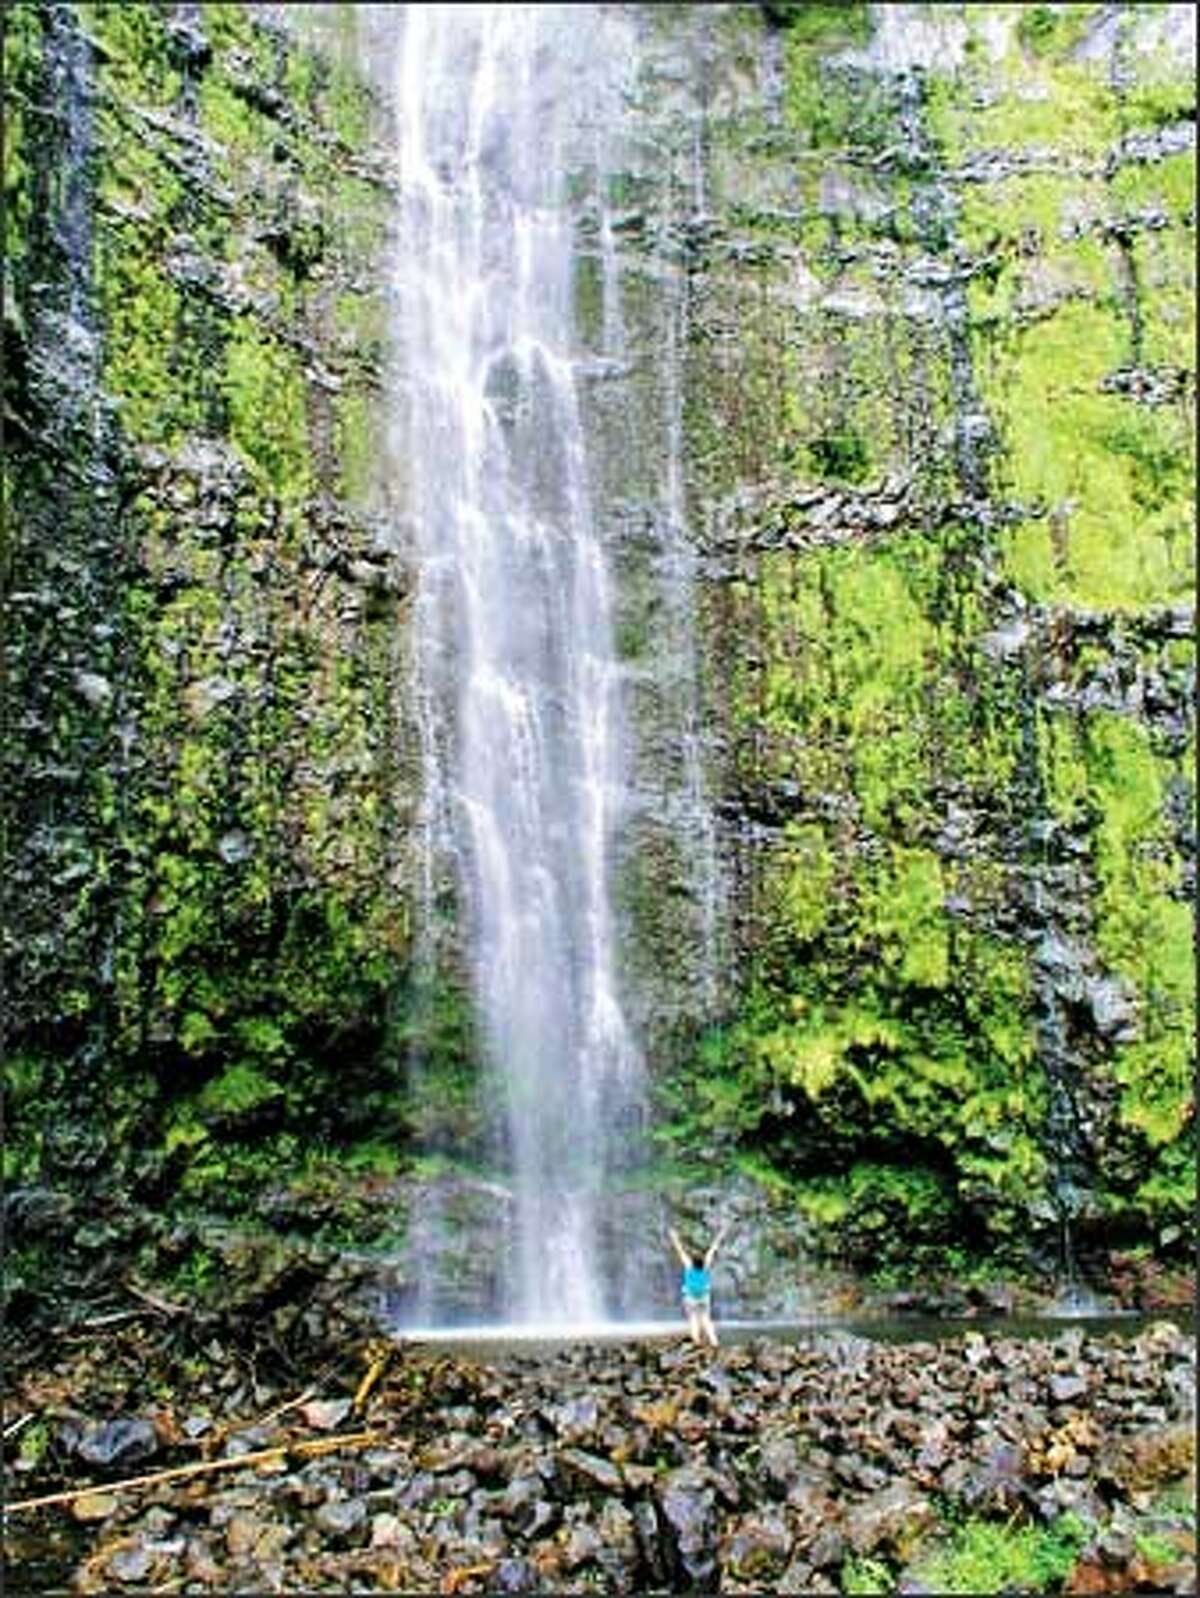 The reward at the end of the Pipiwai Trail is the 400-foot Waimoku Falls.